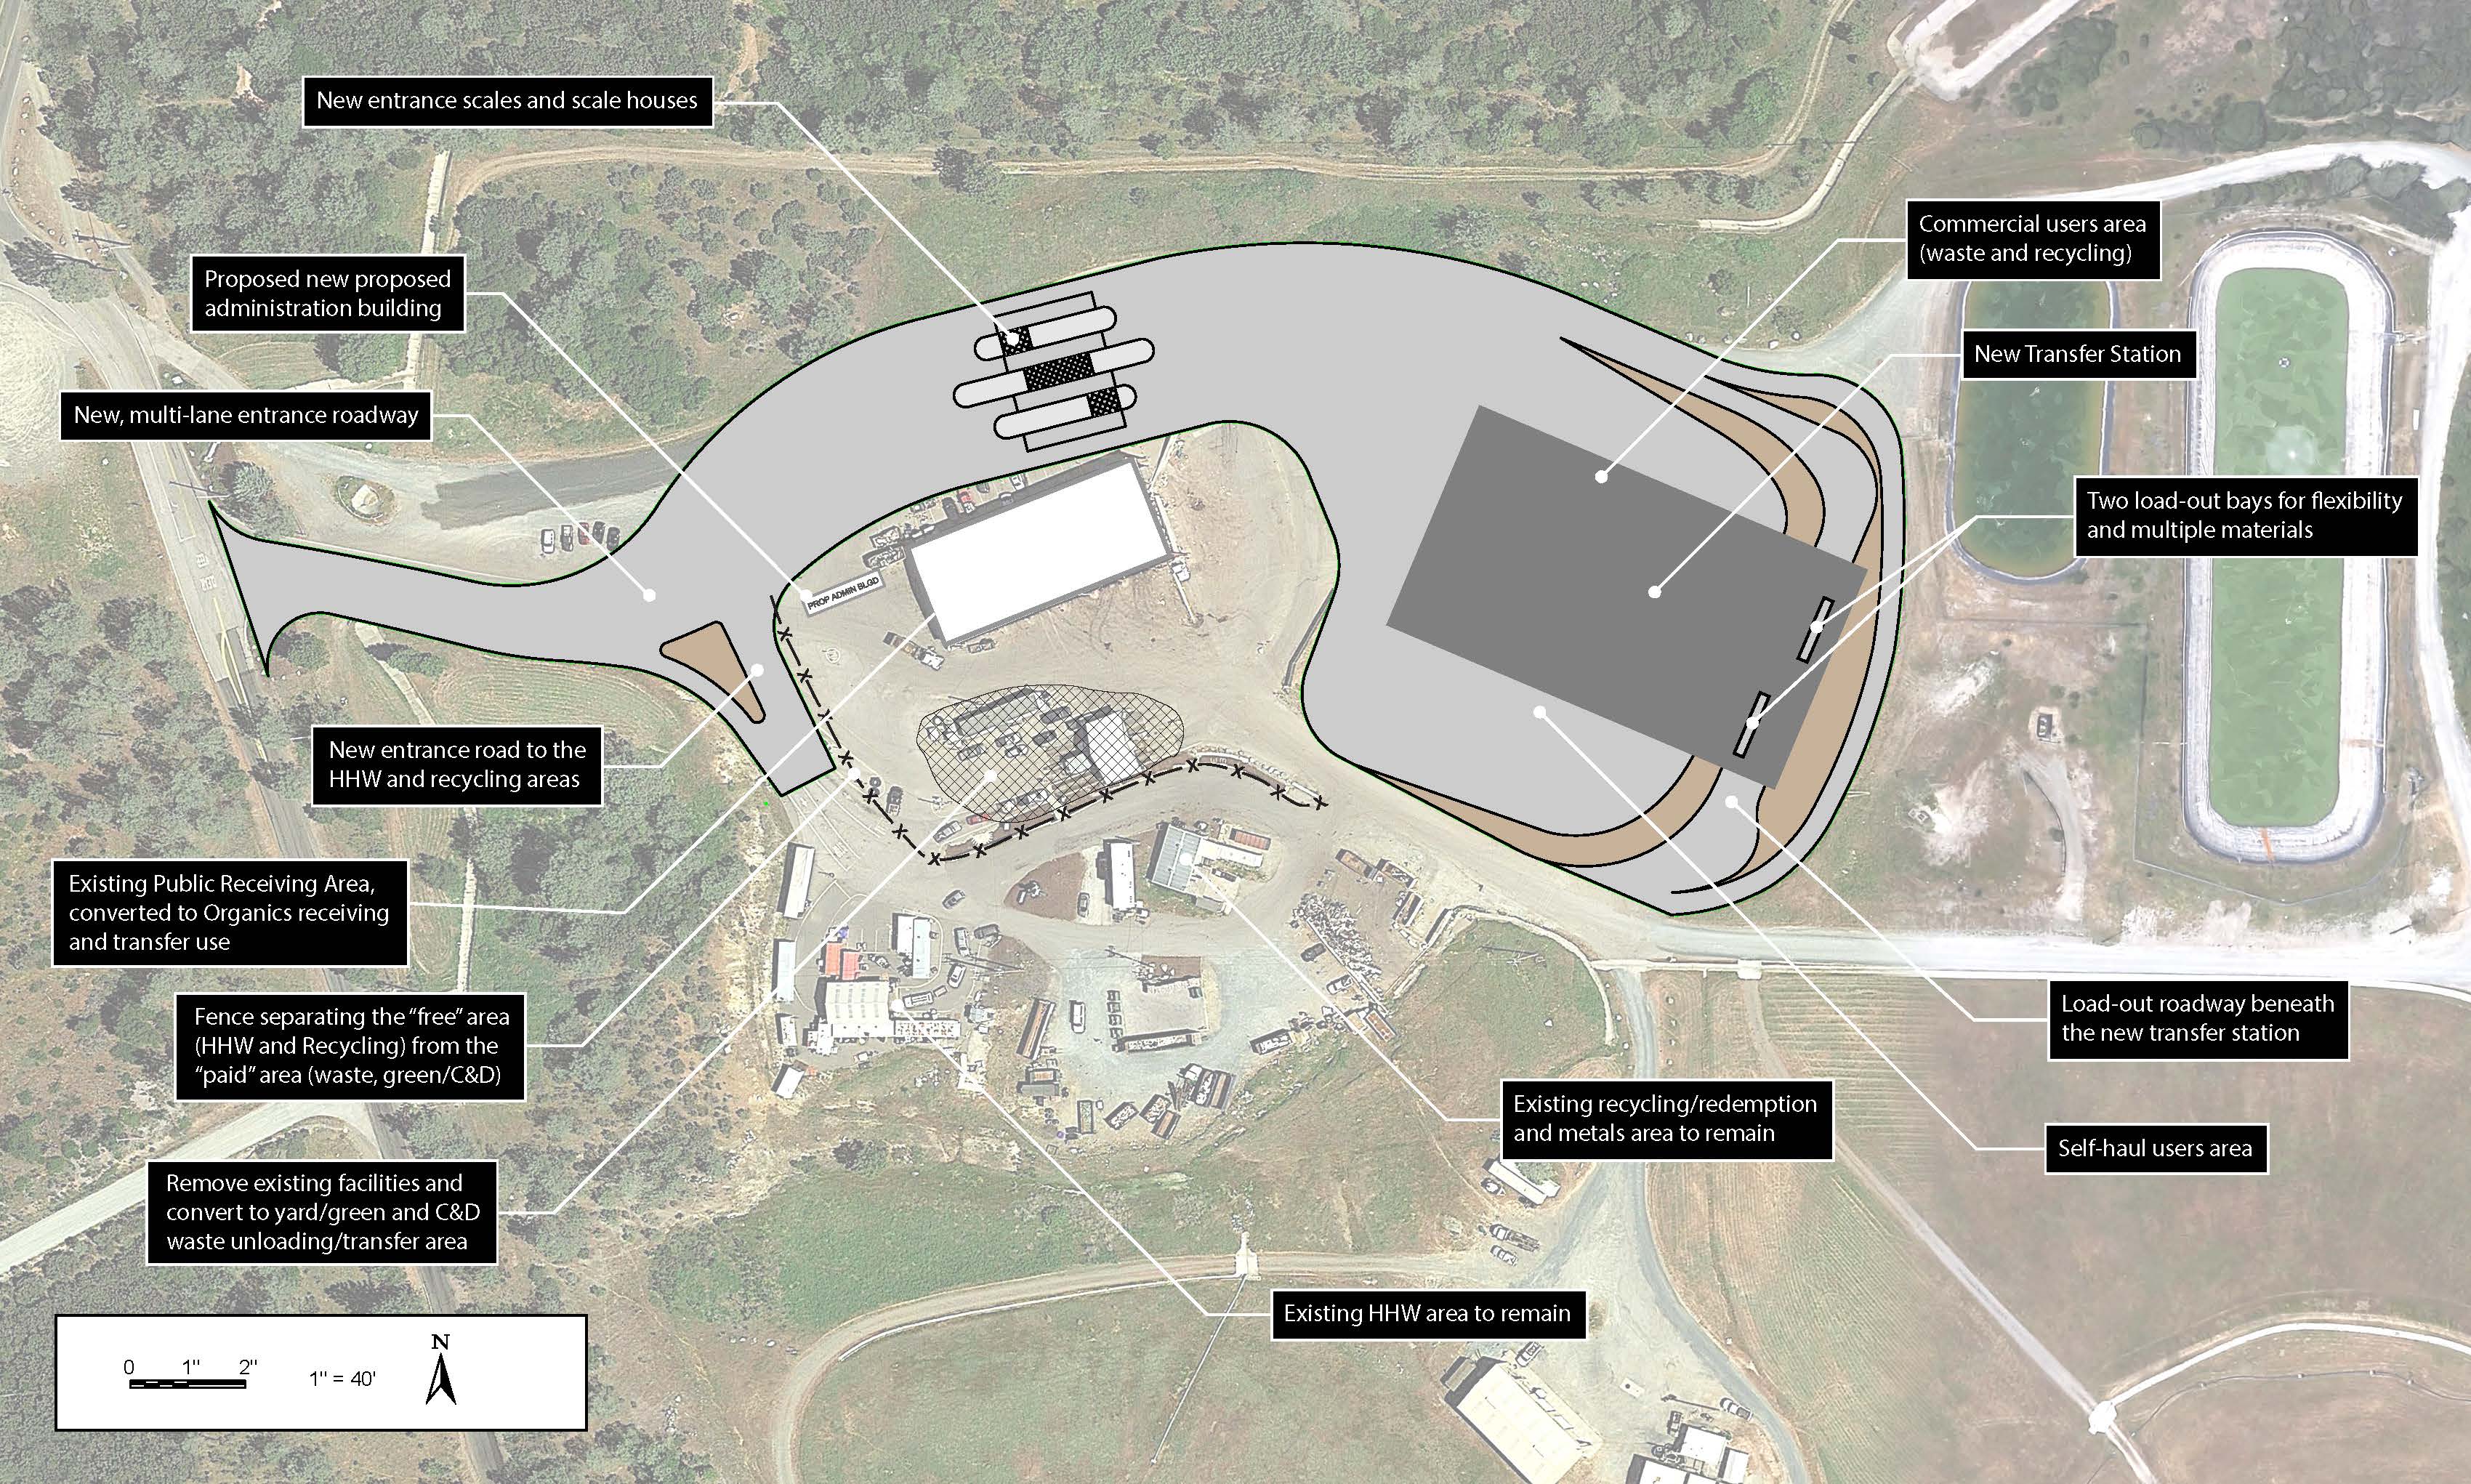 Starting from the entrance going clockwise, site design features include: new entrance scales and scale houses; commercial users area for waste and recycling; new transfer station; two load-out bays for flexibility and multiple materials; load-out roadway beneath the new transfer station; self-haul users area; existing recycling/redemption and metals area to remain; existing HHW area to remain; remove existing facilities and convert to yard/green and C&D waste unloading/transfer area; fence separating the “free” area (HHW and recycling) from the “paid” area (waste, green/C&D); existing PRA converted to Organics receiving and transfer use; new entrance road to the HHW and recycling areas; new, multi-lane entrance roadway; and proposed new administration building.